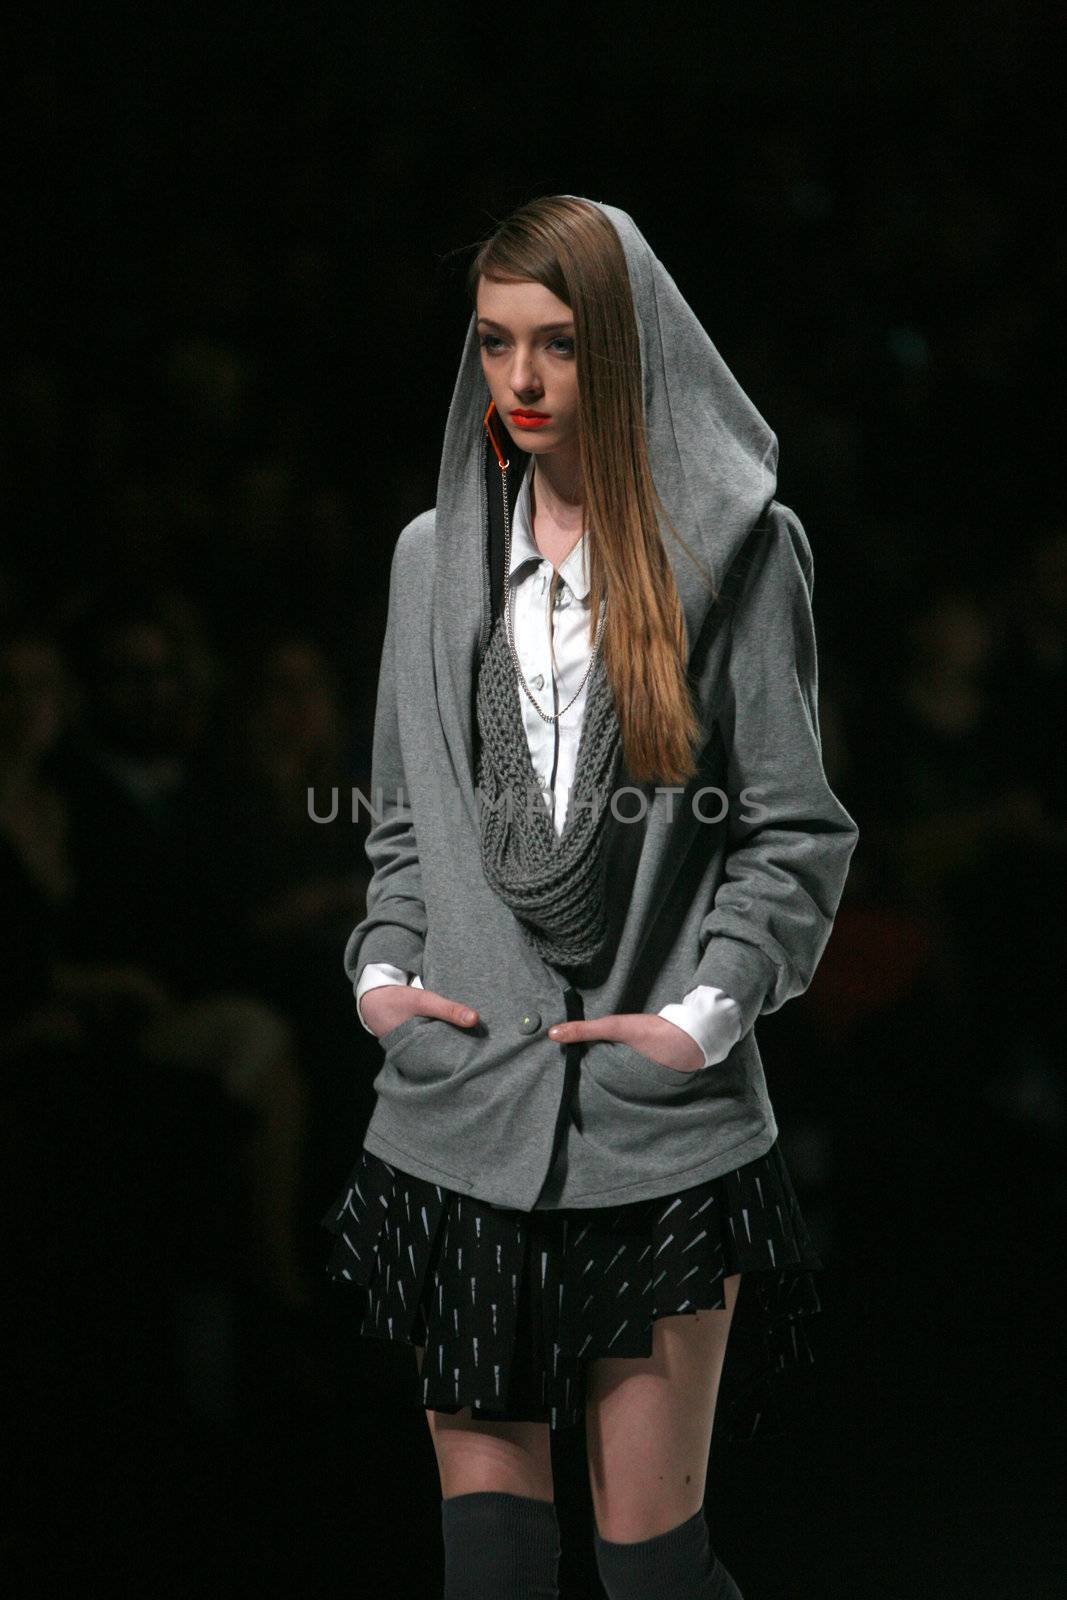 ZAGREB, CROATIA - MARCH 15: Fashion model wears clothes made by design group "Clash of 9" on "Dove FASHION.HR" show on March 15, 2012 in Zagreb, Croatia.